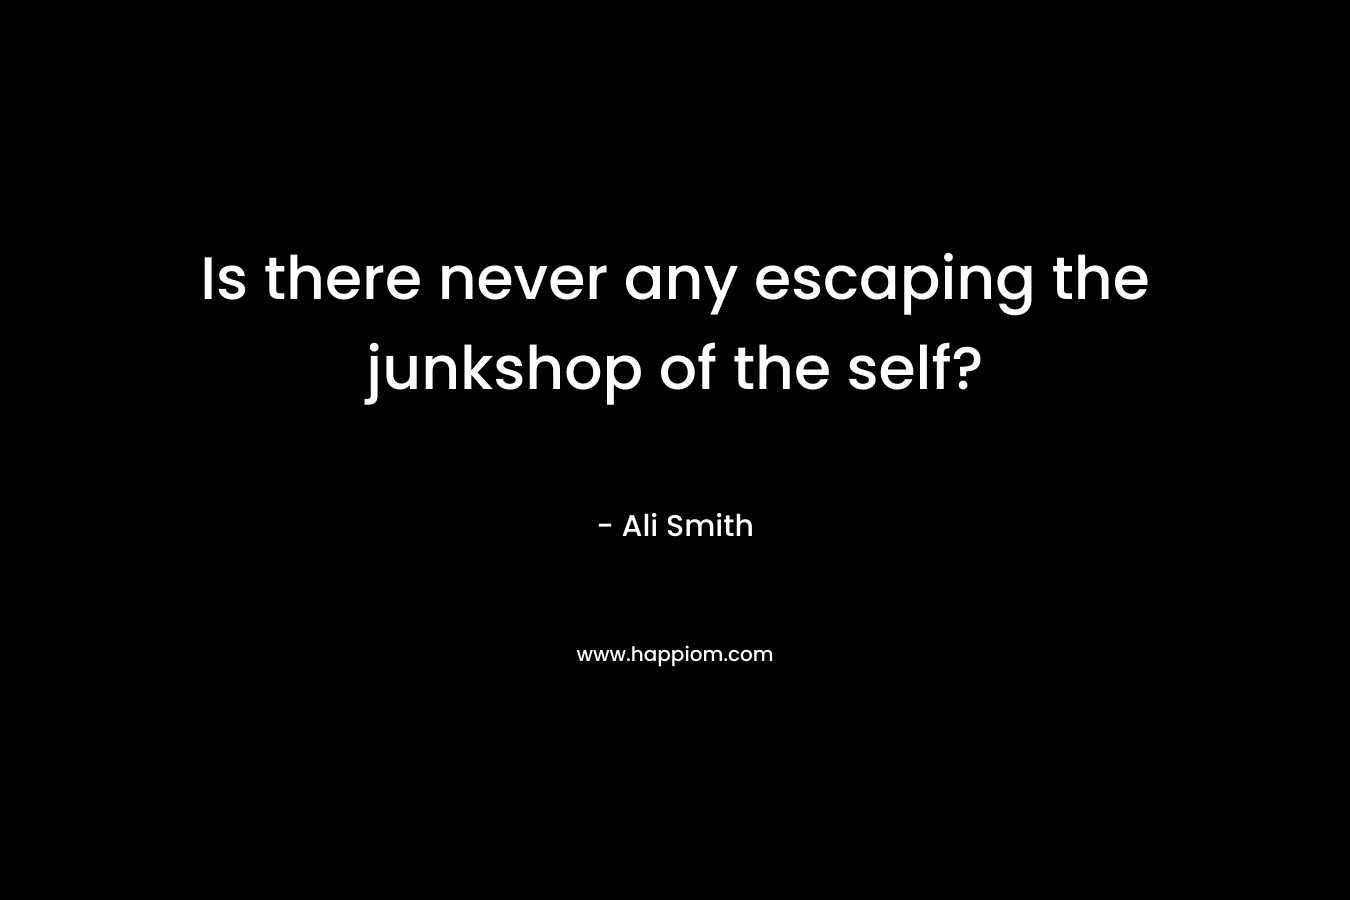 Is there never any escaping the junkshop of the self? – Ali Smith